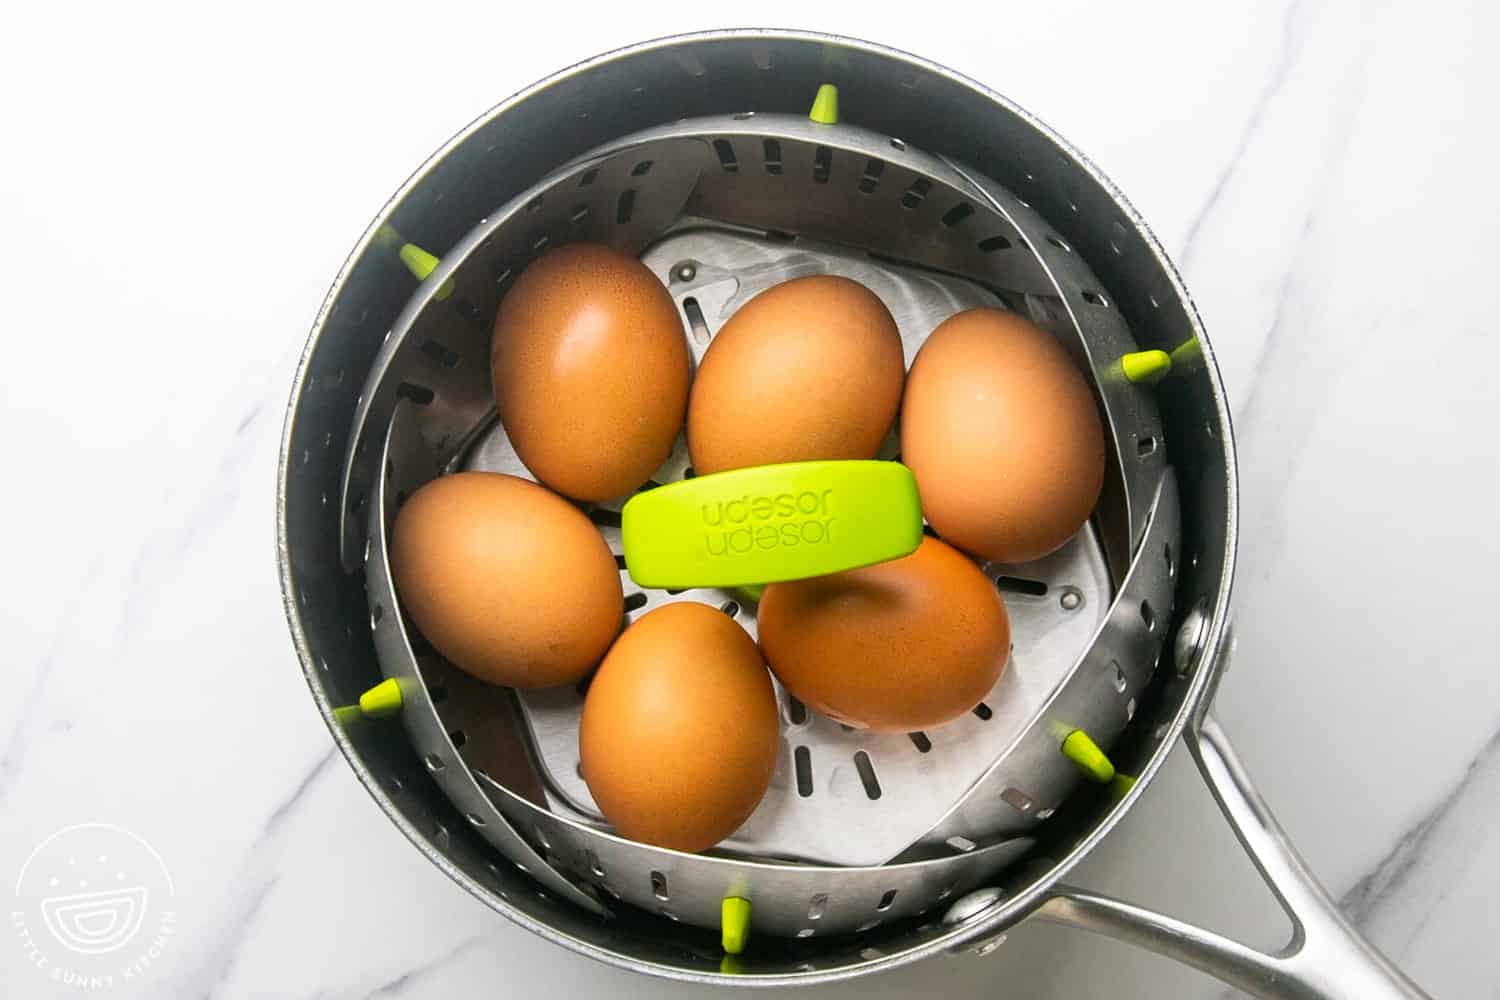 Eggs on a steamer basket in a stainless steel saucepan